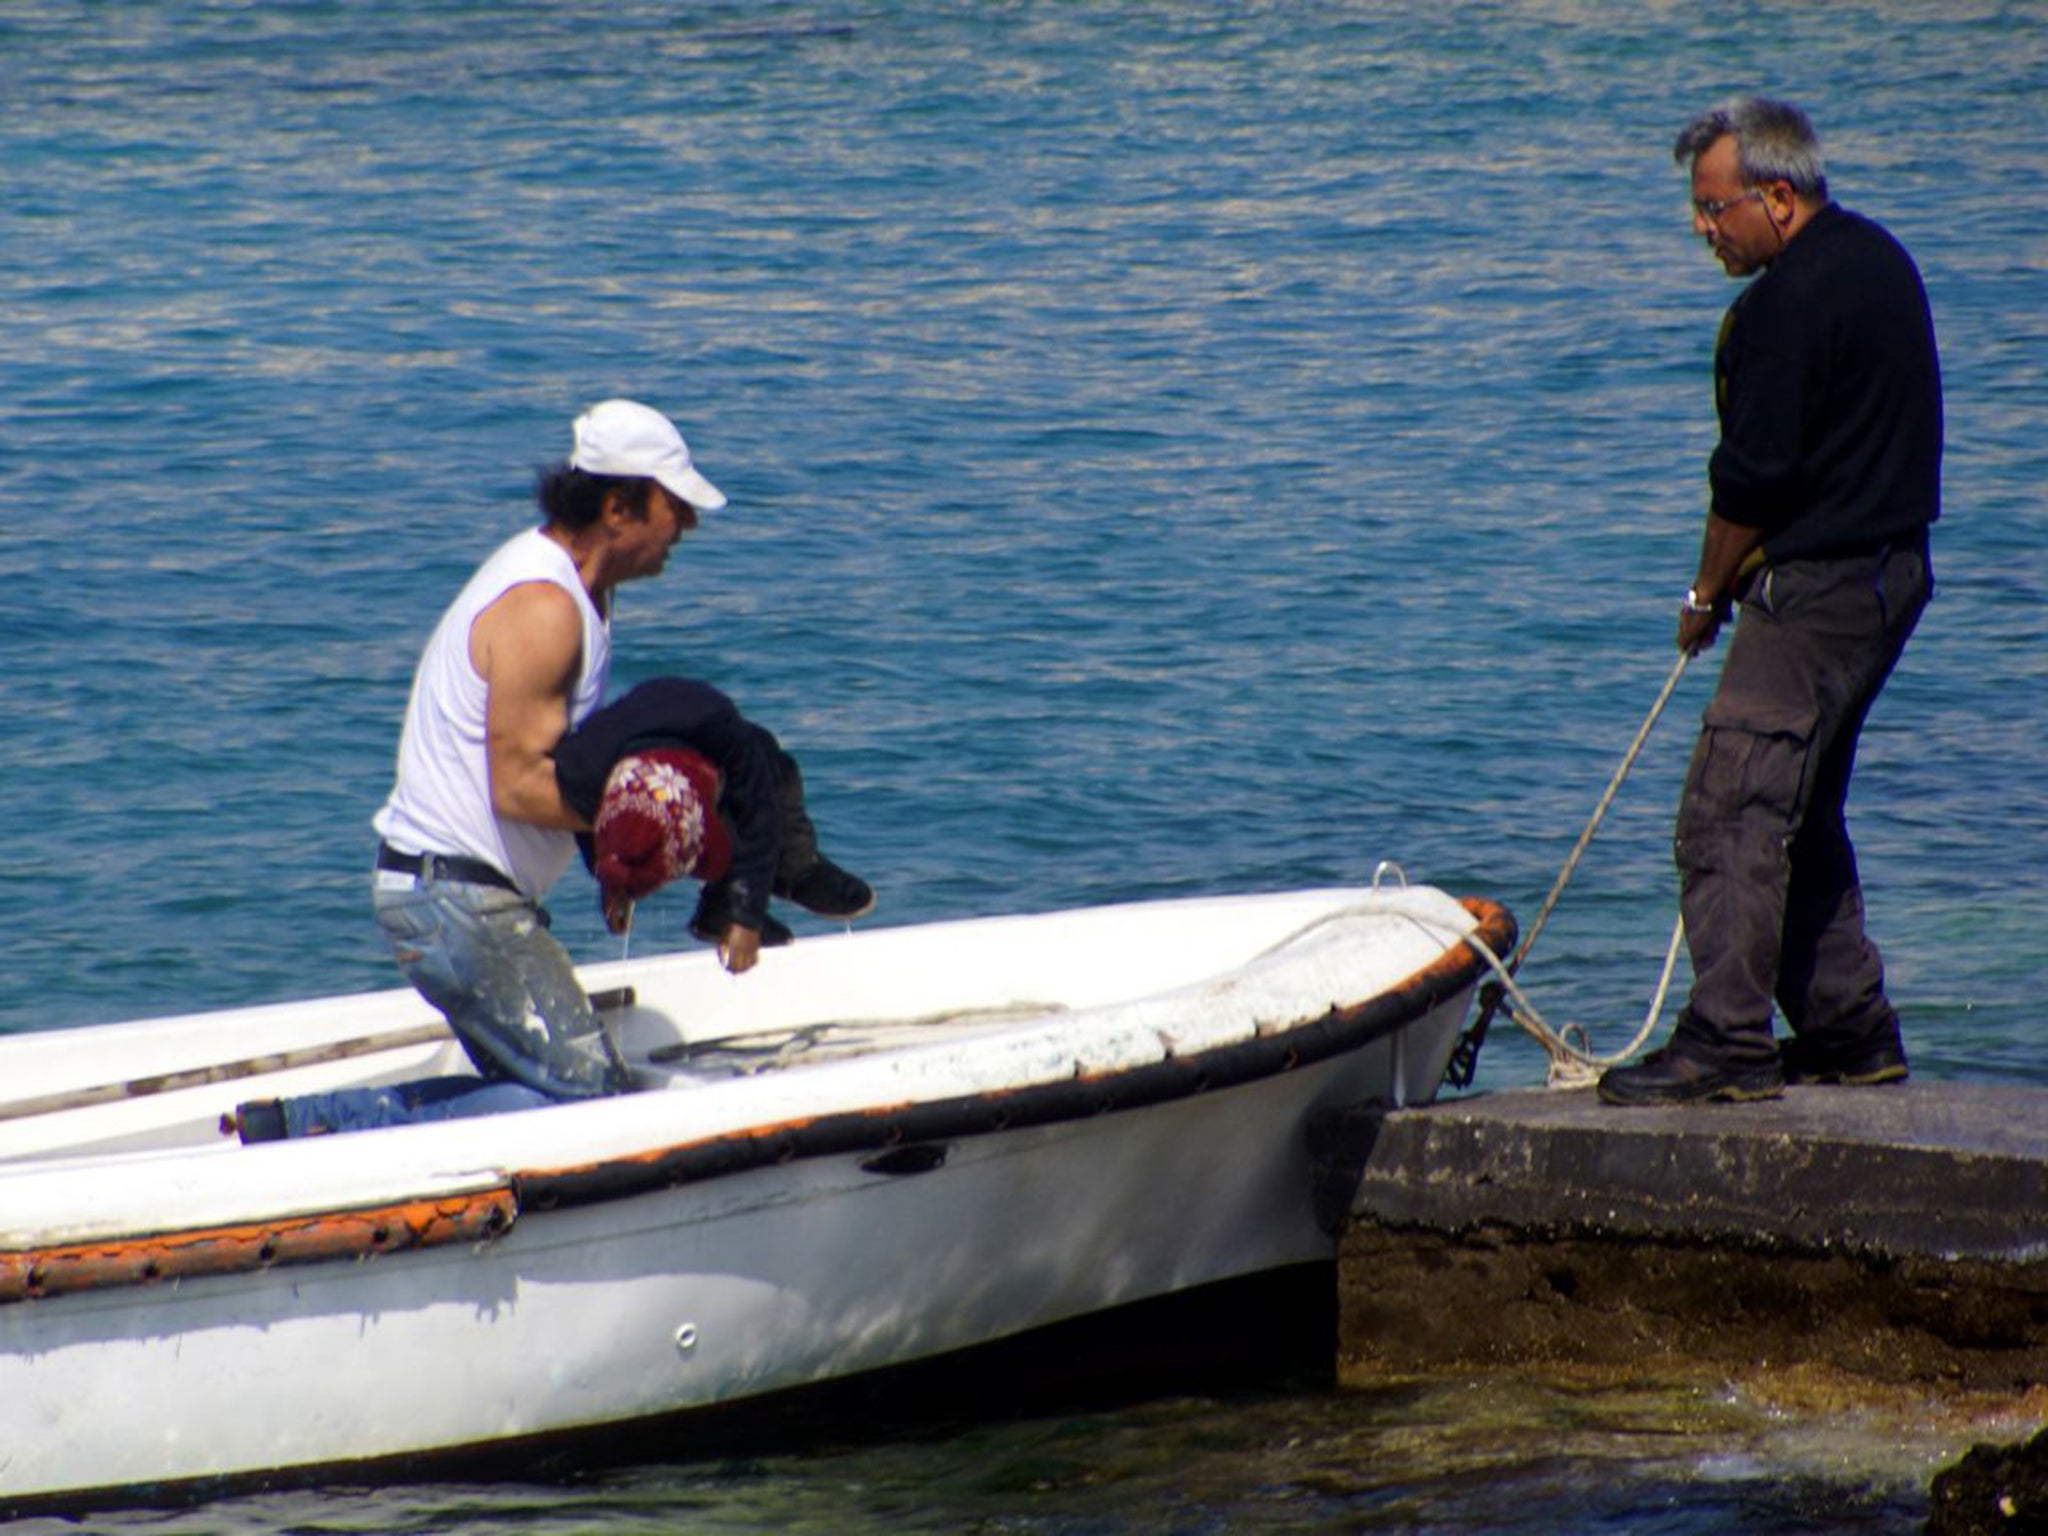 The body of a dead child is recovered off the coast of Rhodes. People smuggling is an industry where demand exceeds supply and the seller does not care greatly if the customer reaches their destination or not